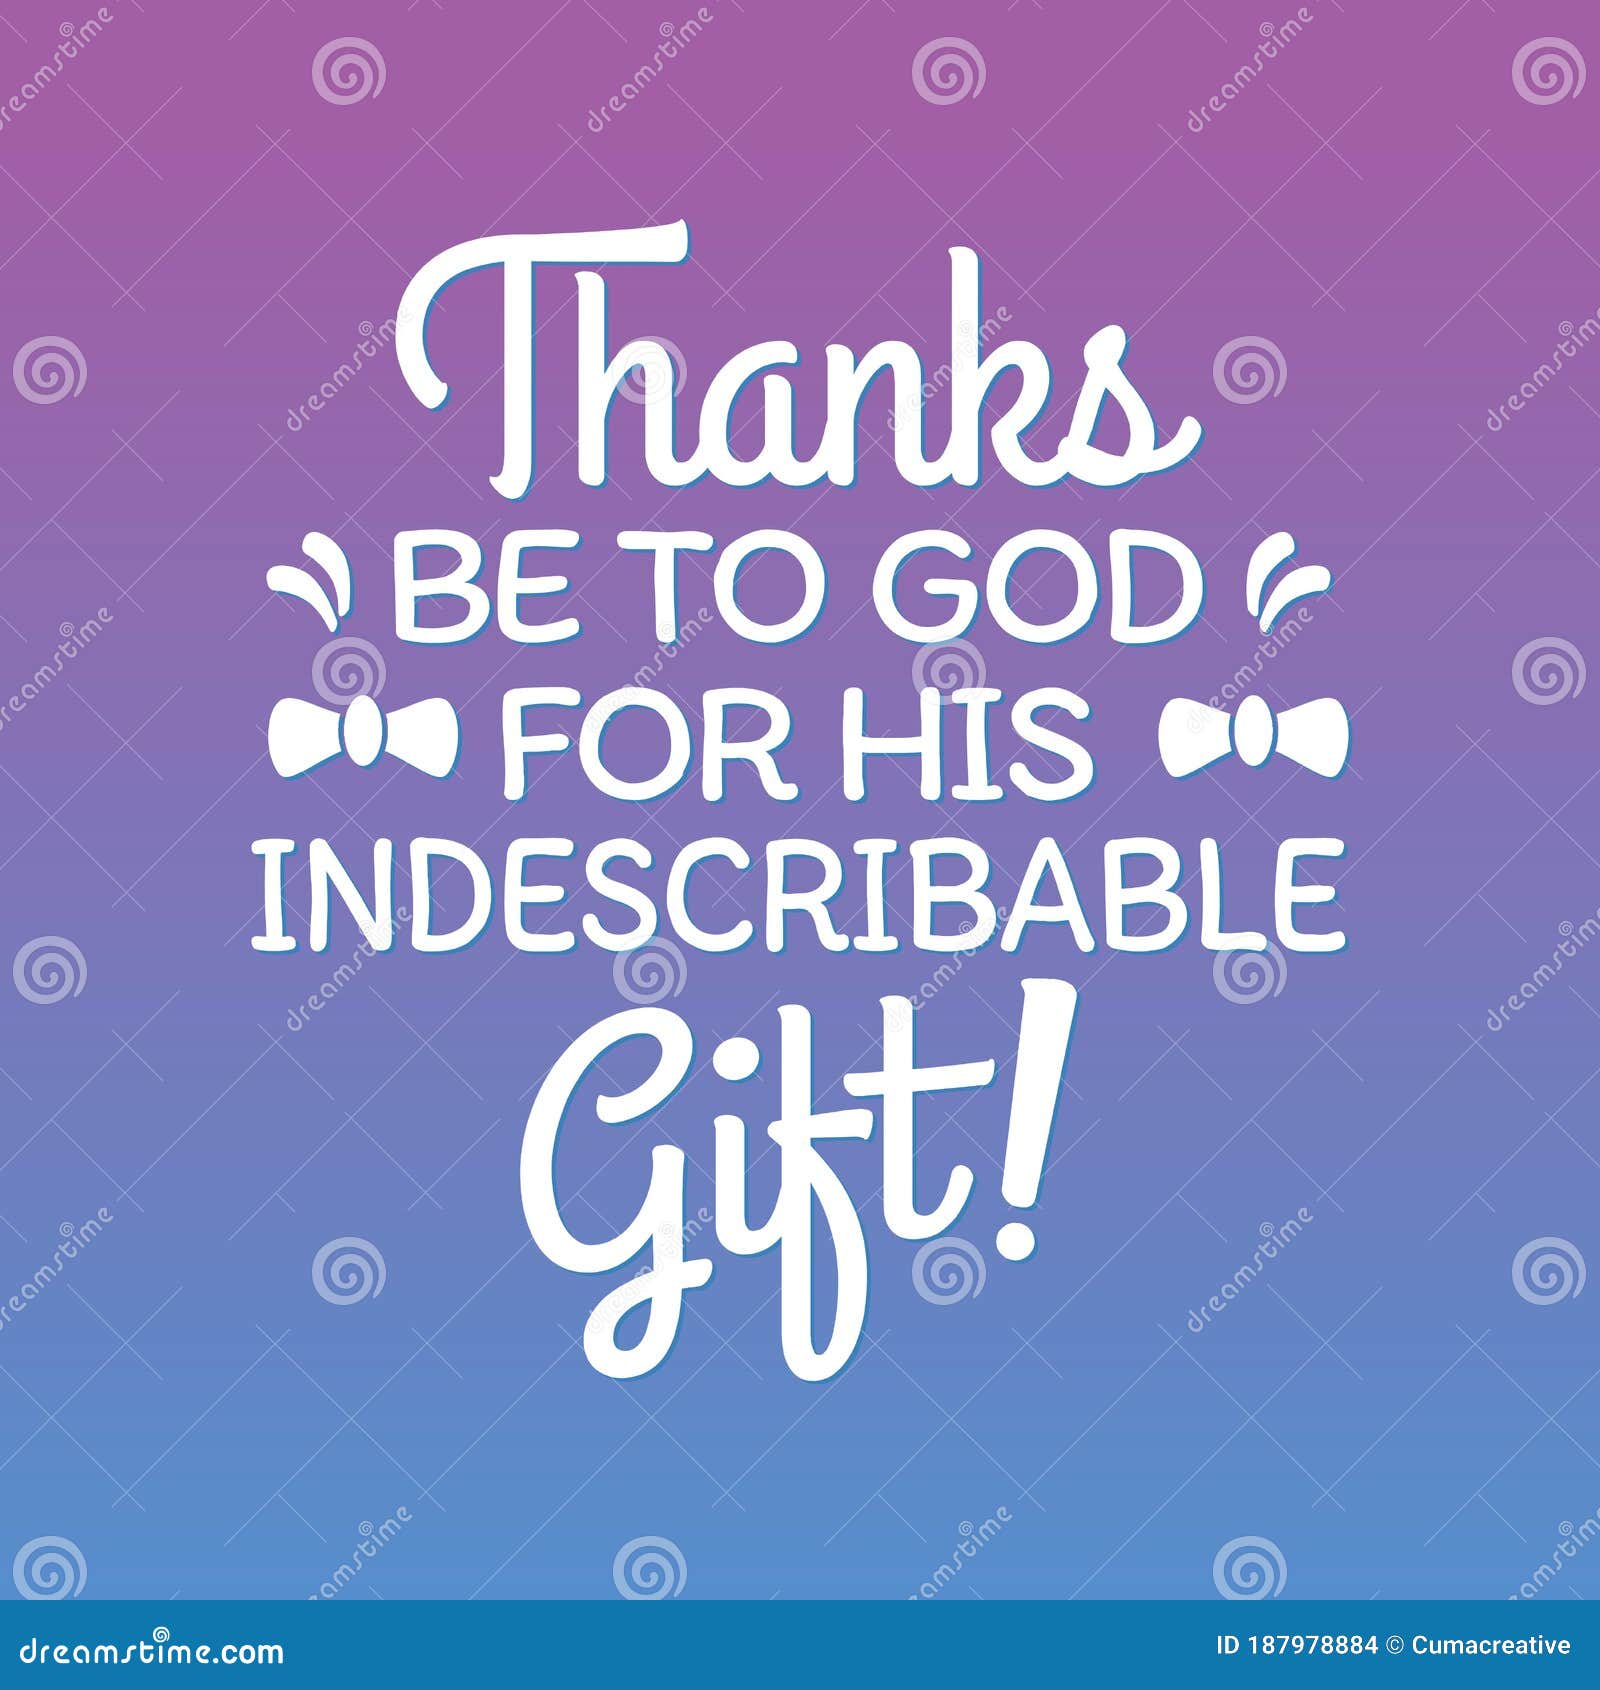 God's Indescribable Gift: A Source of Inspiration and Gratitude